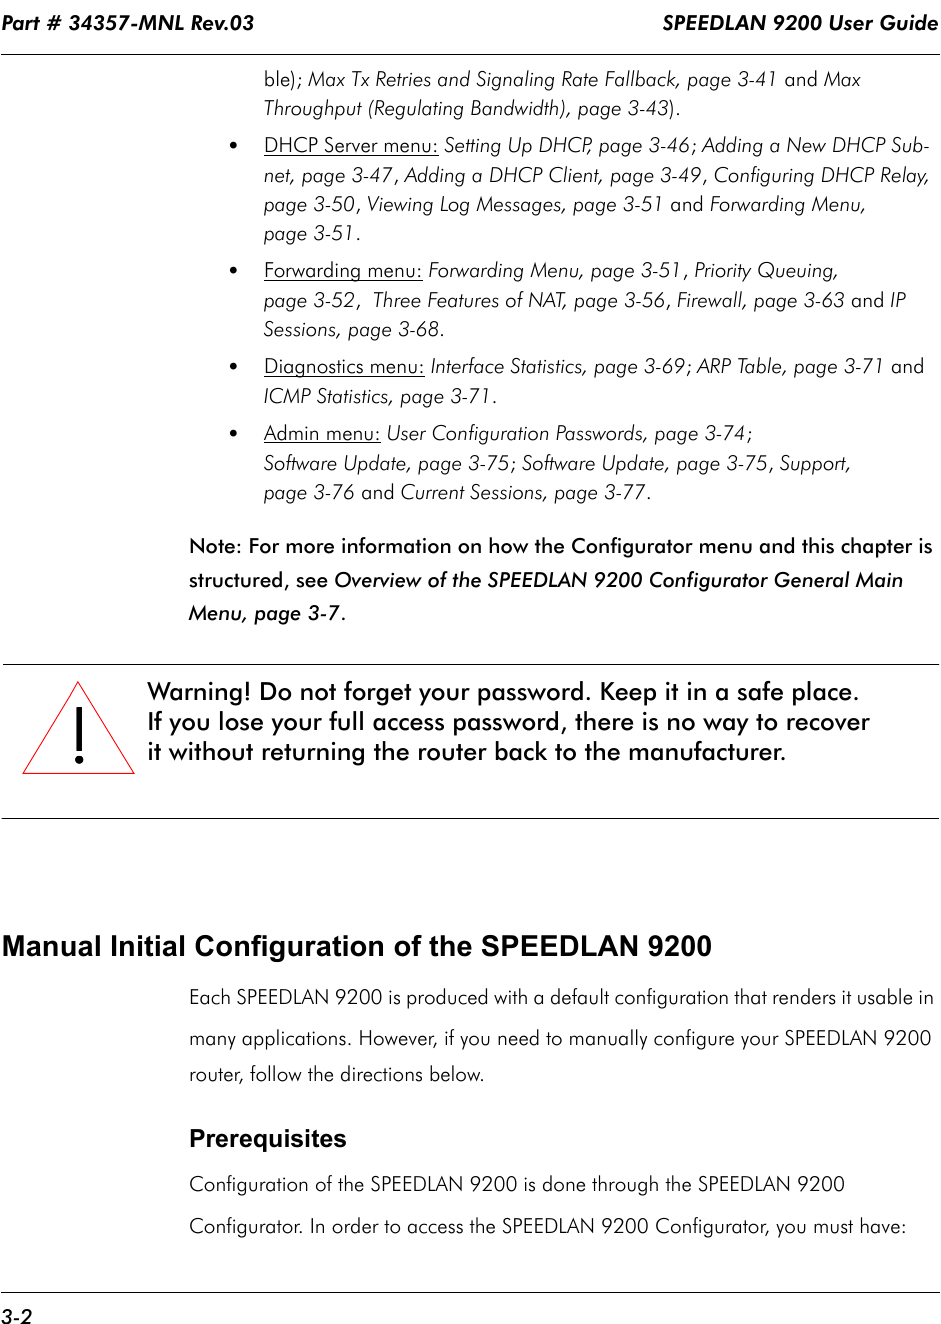 Part # 34357-MNL Rev.03                                                                   SPEEDLAN 9200 User Guide 3-2ble); Max Tx Retries and Signaling Rate Fallback, page 3-41 and Max Throughput (Regulating Bandwidth), page 3-43).•DHCP Server menu: Setting Up DHCP, page 3-46; Adding a New DHCP Sub-net, page 3-47, Adding a DHCP Client, page 3-49, Configuring DHCP Relay, page 3-50, Viewing Log Messages, page 3-51 and Forwarding Menu, page 3-51.•Forwarding menu: Forwarding Menu, page 3-51, Priority Queuing, page 3-52,  Three Features of NAT, page 3-56, Firewall, page 3-63 and IP Sessions, page 3-68.•Diagnostics menu: Interface Statistics, page 3-69; ARP Table, page 3-71 and ICMP Statistics, page 3-71.•Admin menu: User Configuration Passwords, page 3-74;Software Update, page 3-75; Software Update, page 3-75, Support, page 3-76 and Current Sessions, page 3-77.Note: For more information on how the Configurator menu and this chapter is structured, see Overview of the SPEEDLAN 9200 Configurator General Main Menu, page 3-7.Manual Initial Configuration of the SPEEDLAN 9200Each SPEEDLAN 9200 is produced with a default configuration that renders it usable in many applications. However, if you need to manually configure your SPEEDLAN 9200 router, follow the directions below.Prerequisites Configuration of the SPEEDLAN 9200 is done through the SPEEDLAN 9200 Configurator. In order to access the SPEEDLAN 9200 Configurator, you must have:!!!!Warning! Do not forget your password. Keep it in a safe place.If you lose your full access password, there is no way to recover it without returning the router back to the manufacturer.               